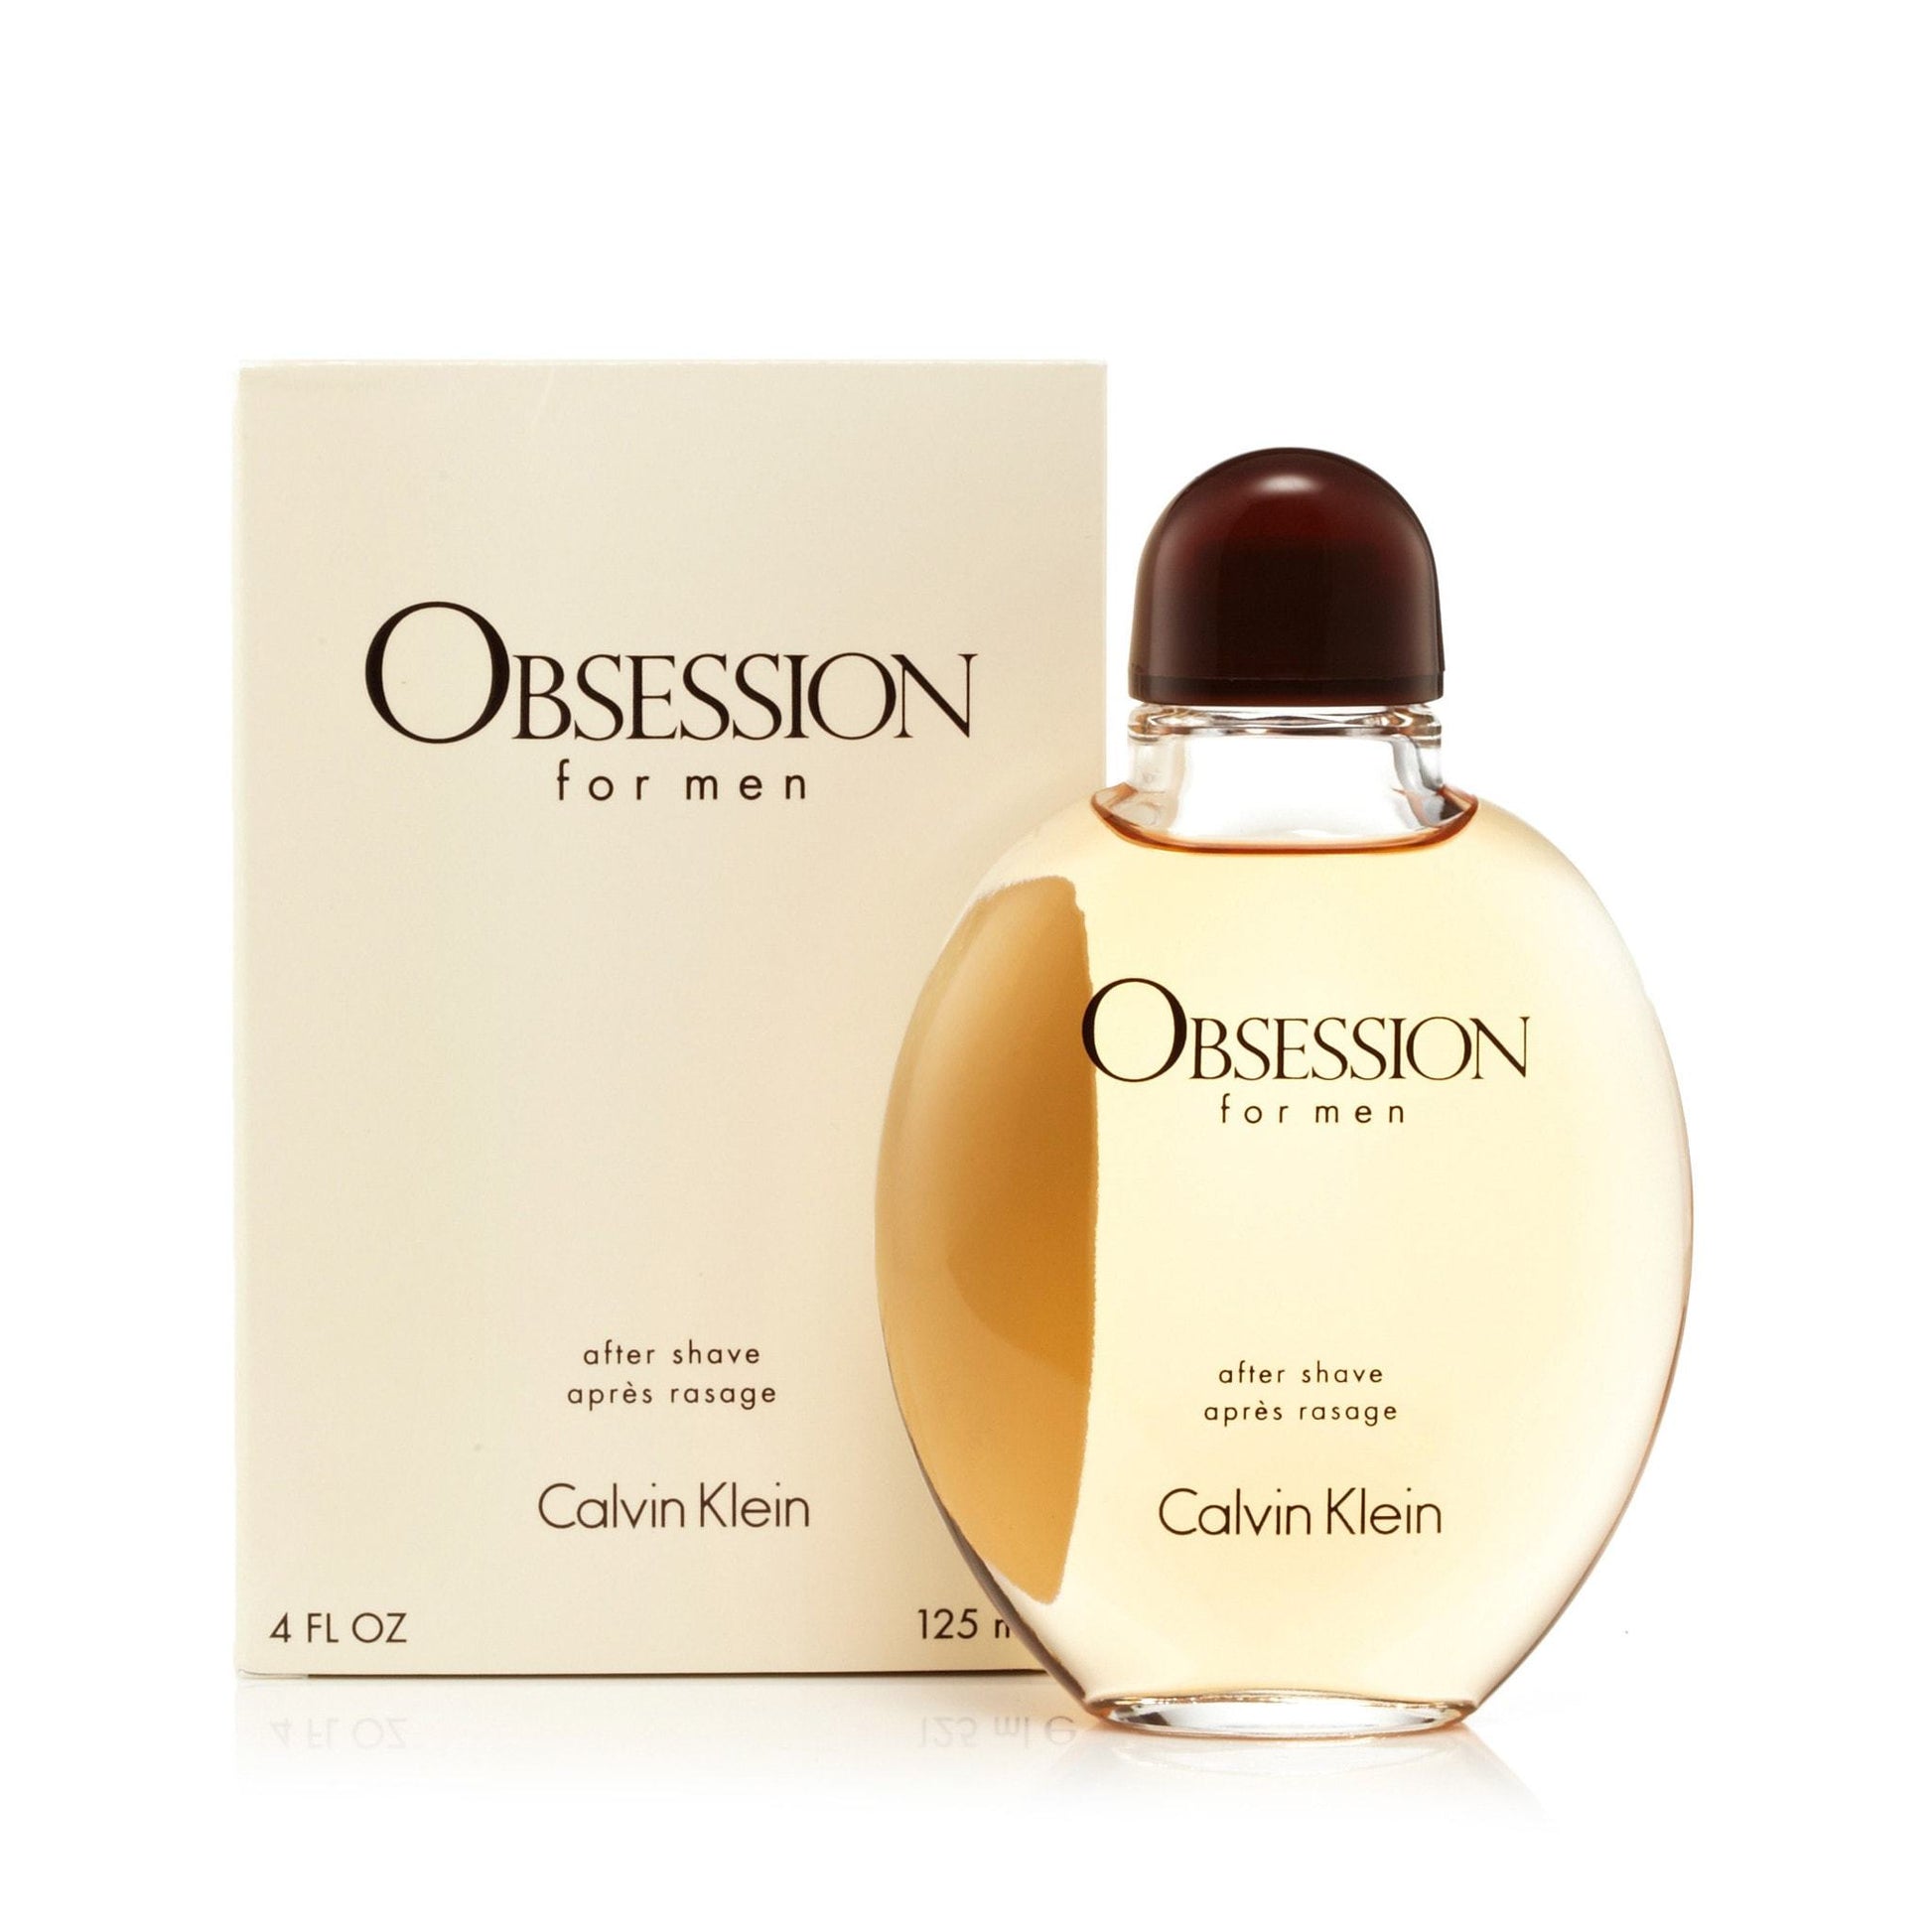 Obsession After Shave for Men by Calvin Klein, Product image 2